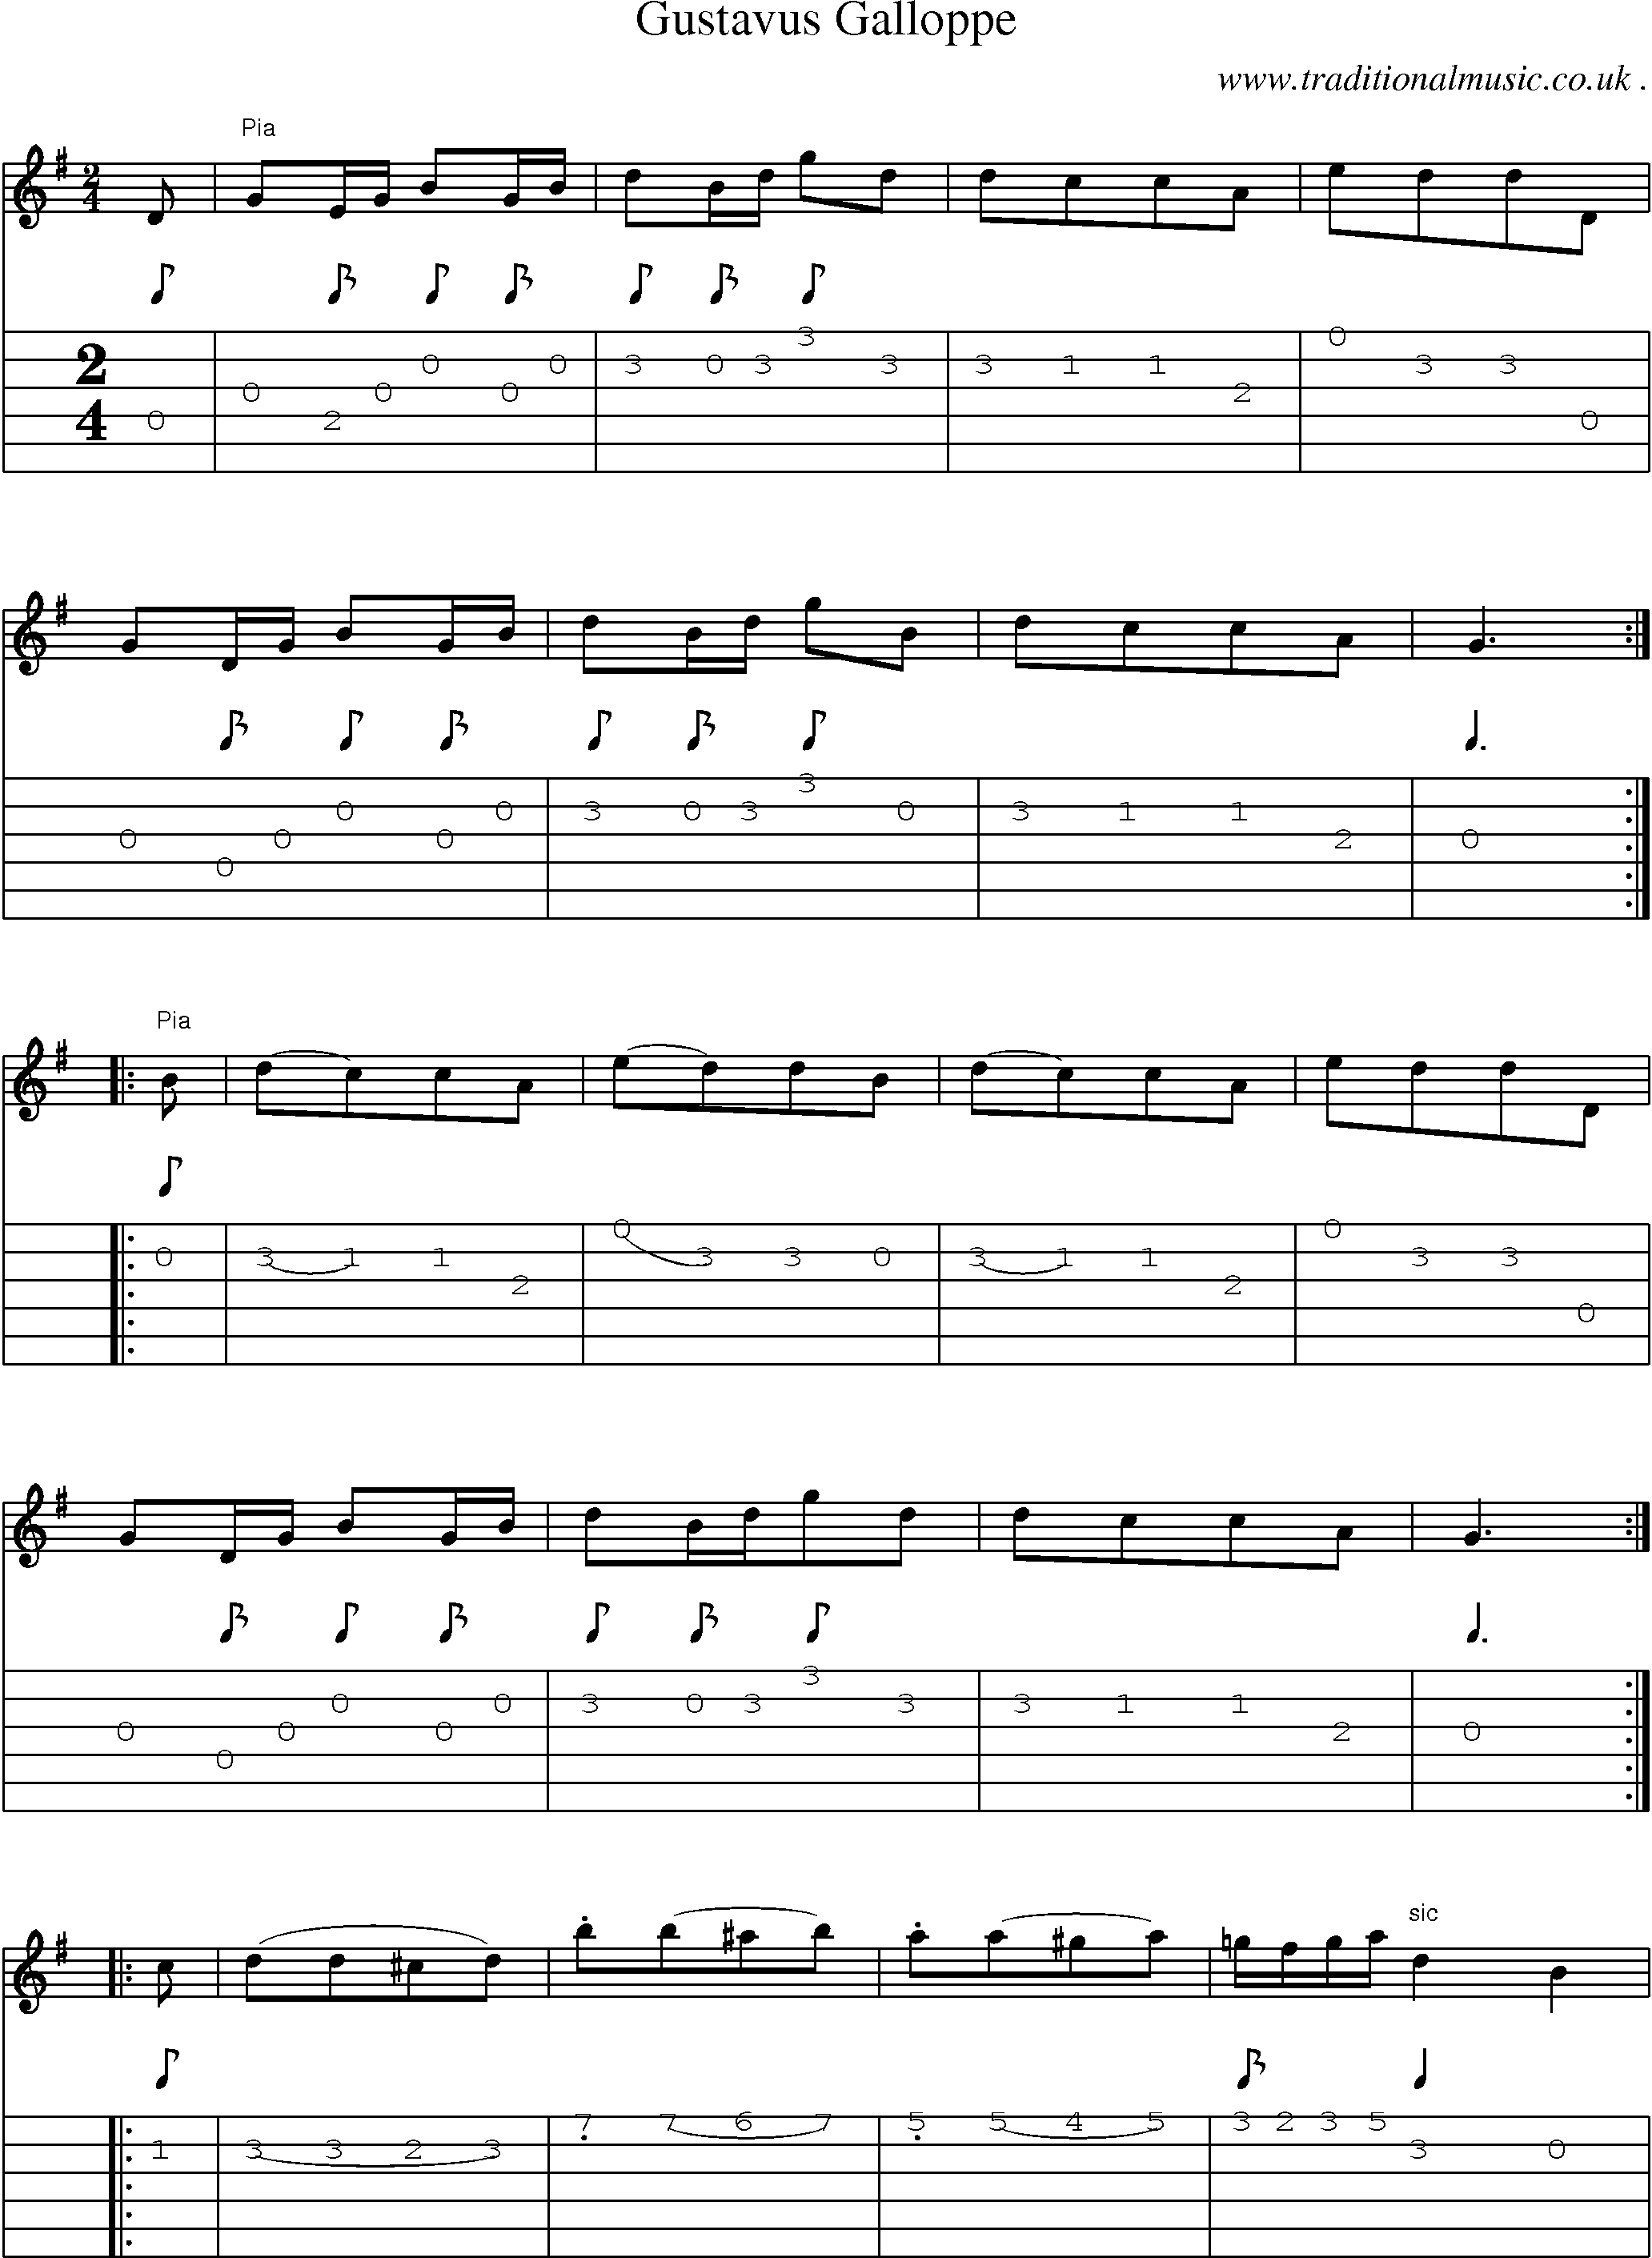 Sheet-Music and Guitar Tabs for Gustavus Galloppe